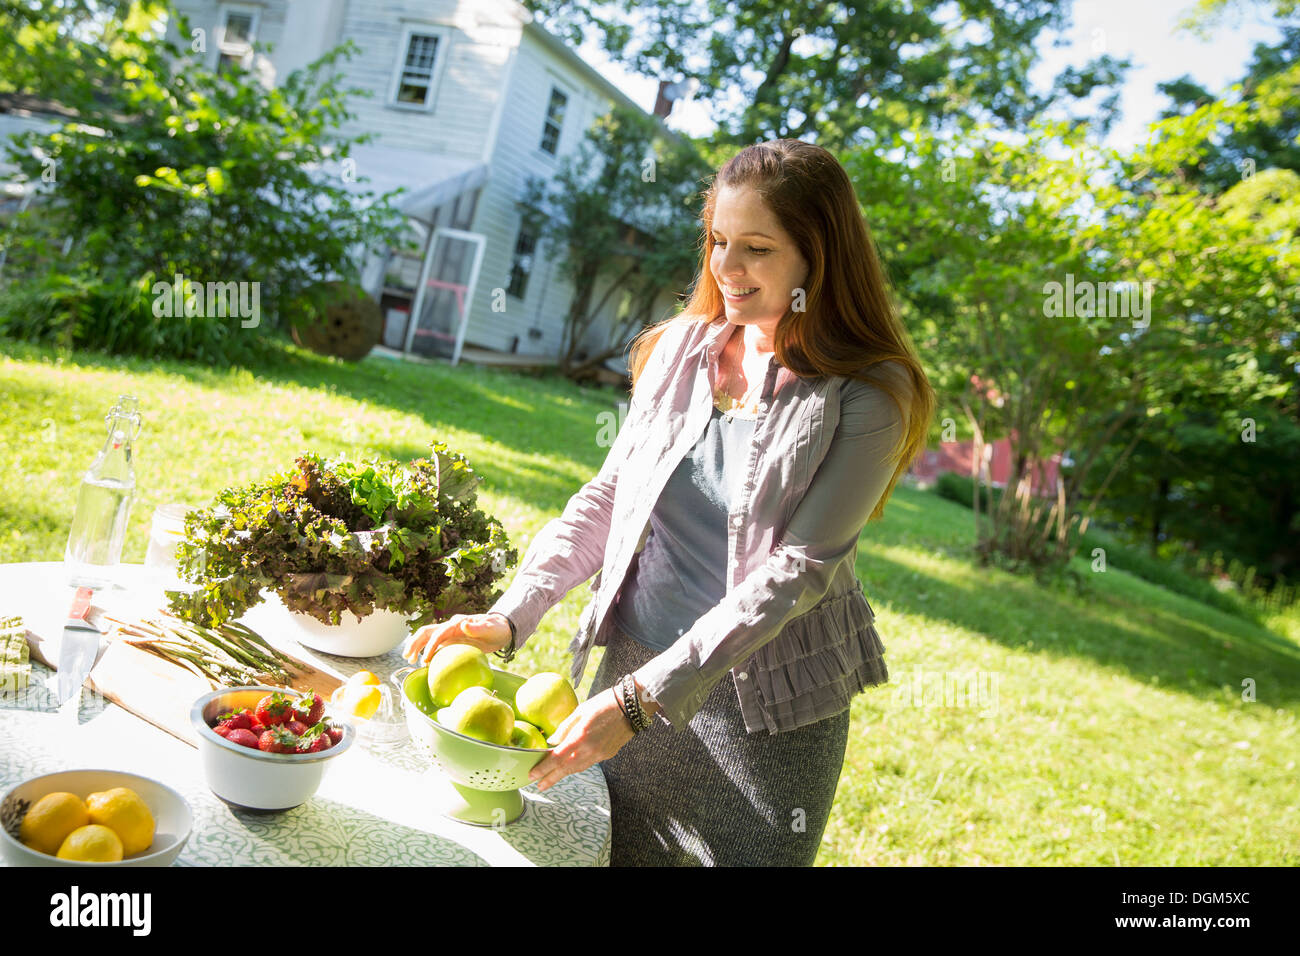 On farm woman in farmhouse garden preparing table fresh organic foods fresh vegetables salads bowls of fresh fruit for meal Stock Photo